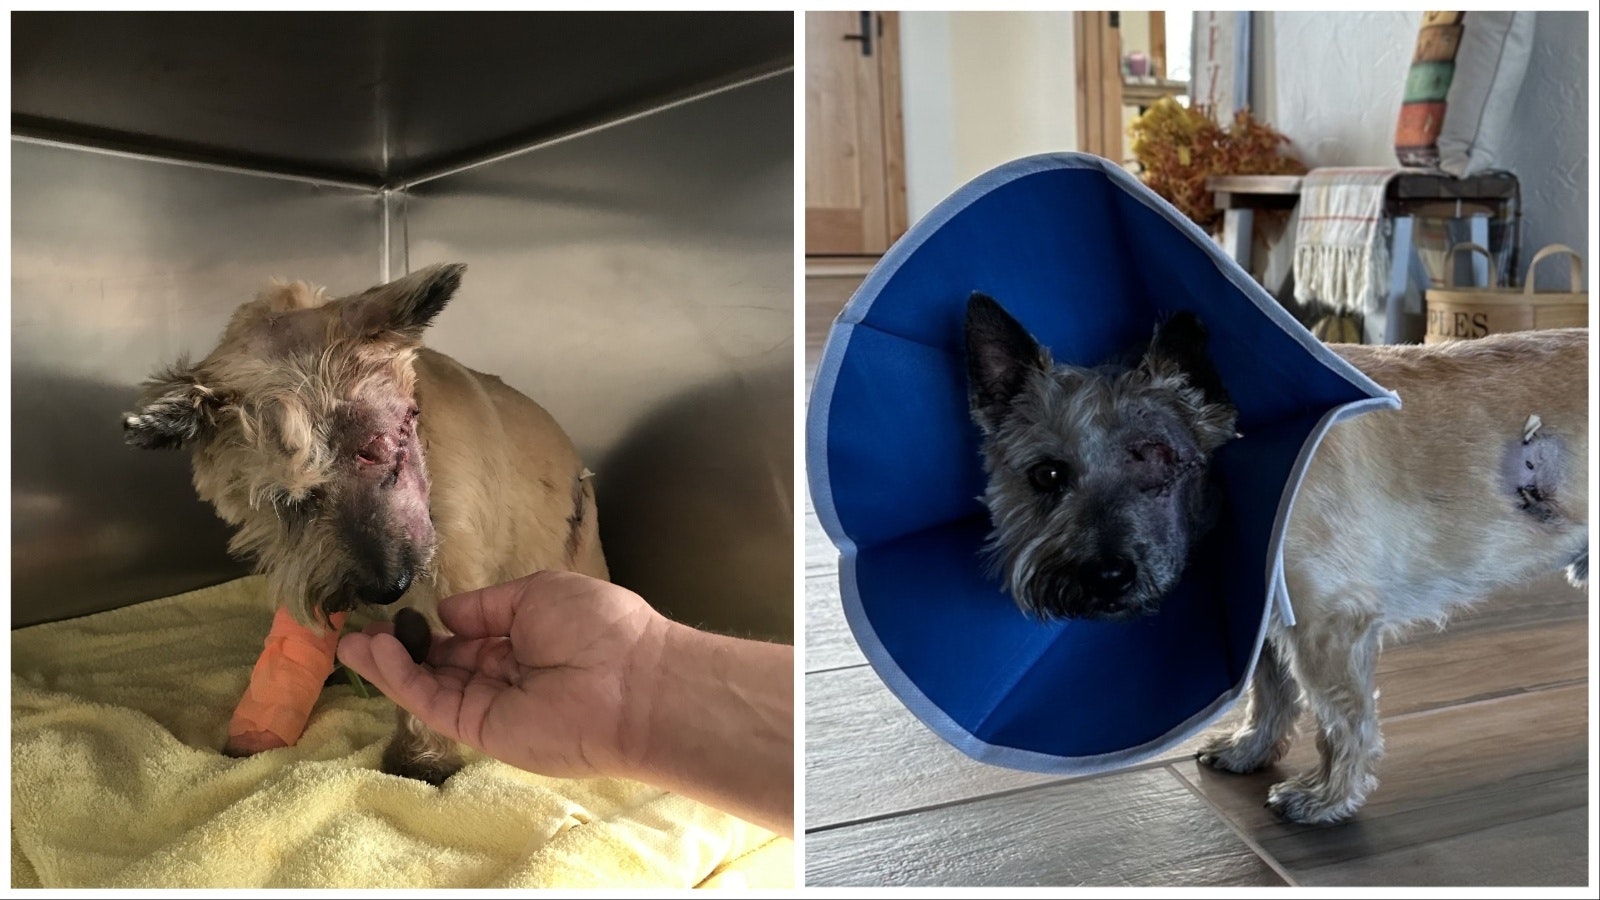 Odin, a 15-pound Cairn Terrier from Crook County, suffered grave wounds in a mountain lion attack.